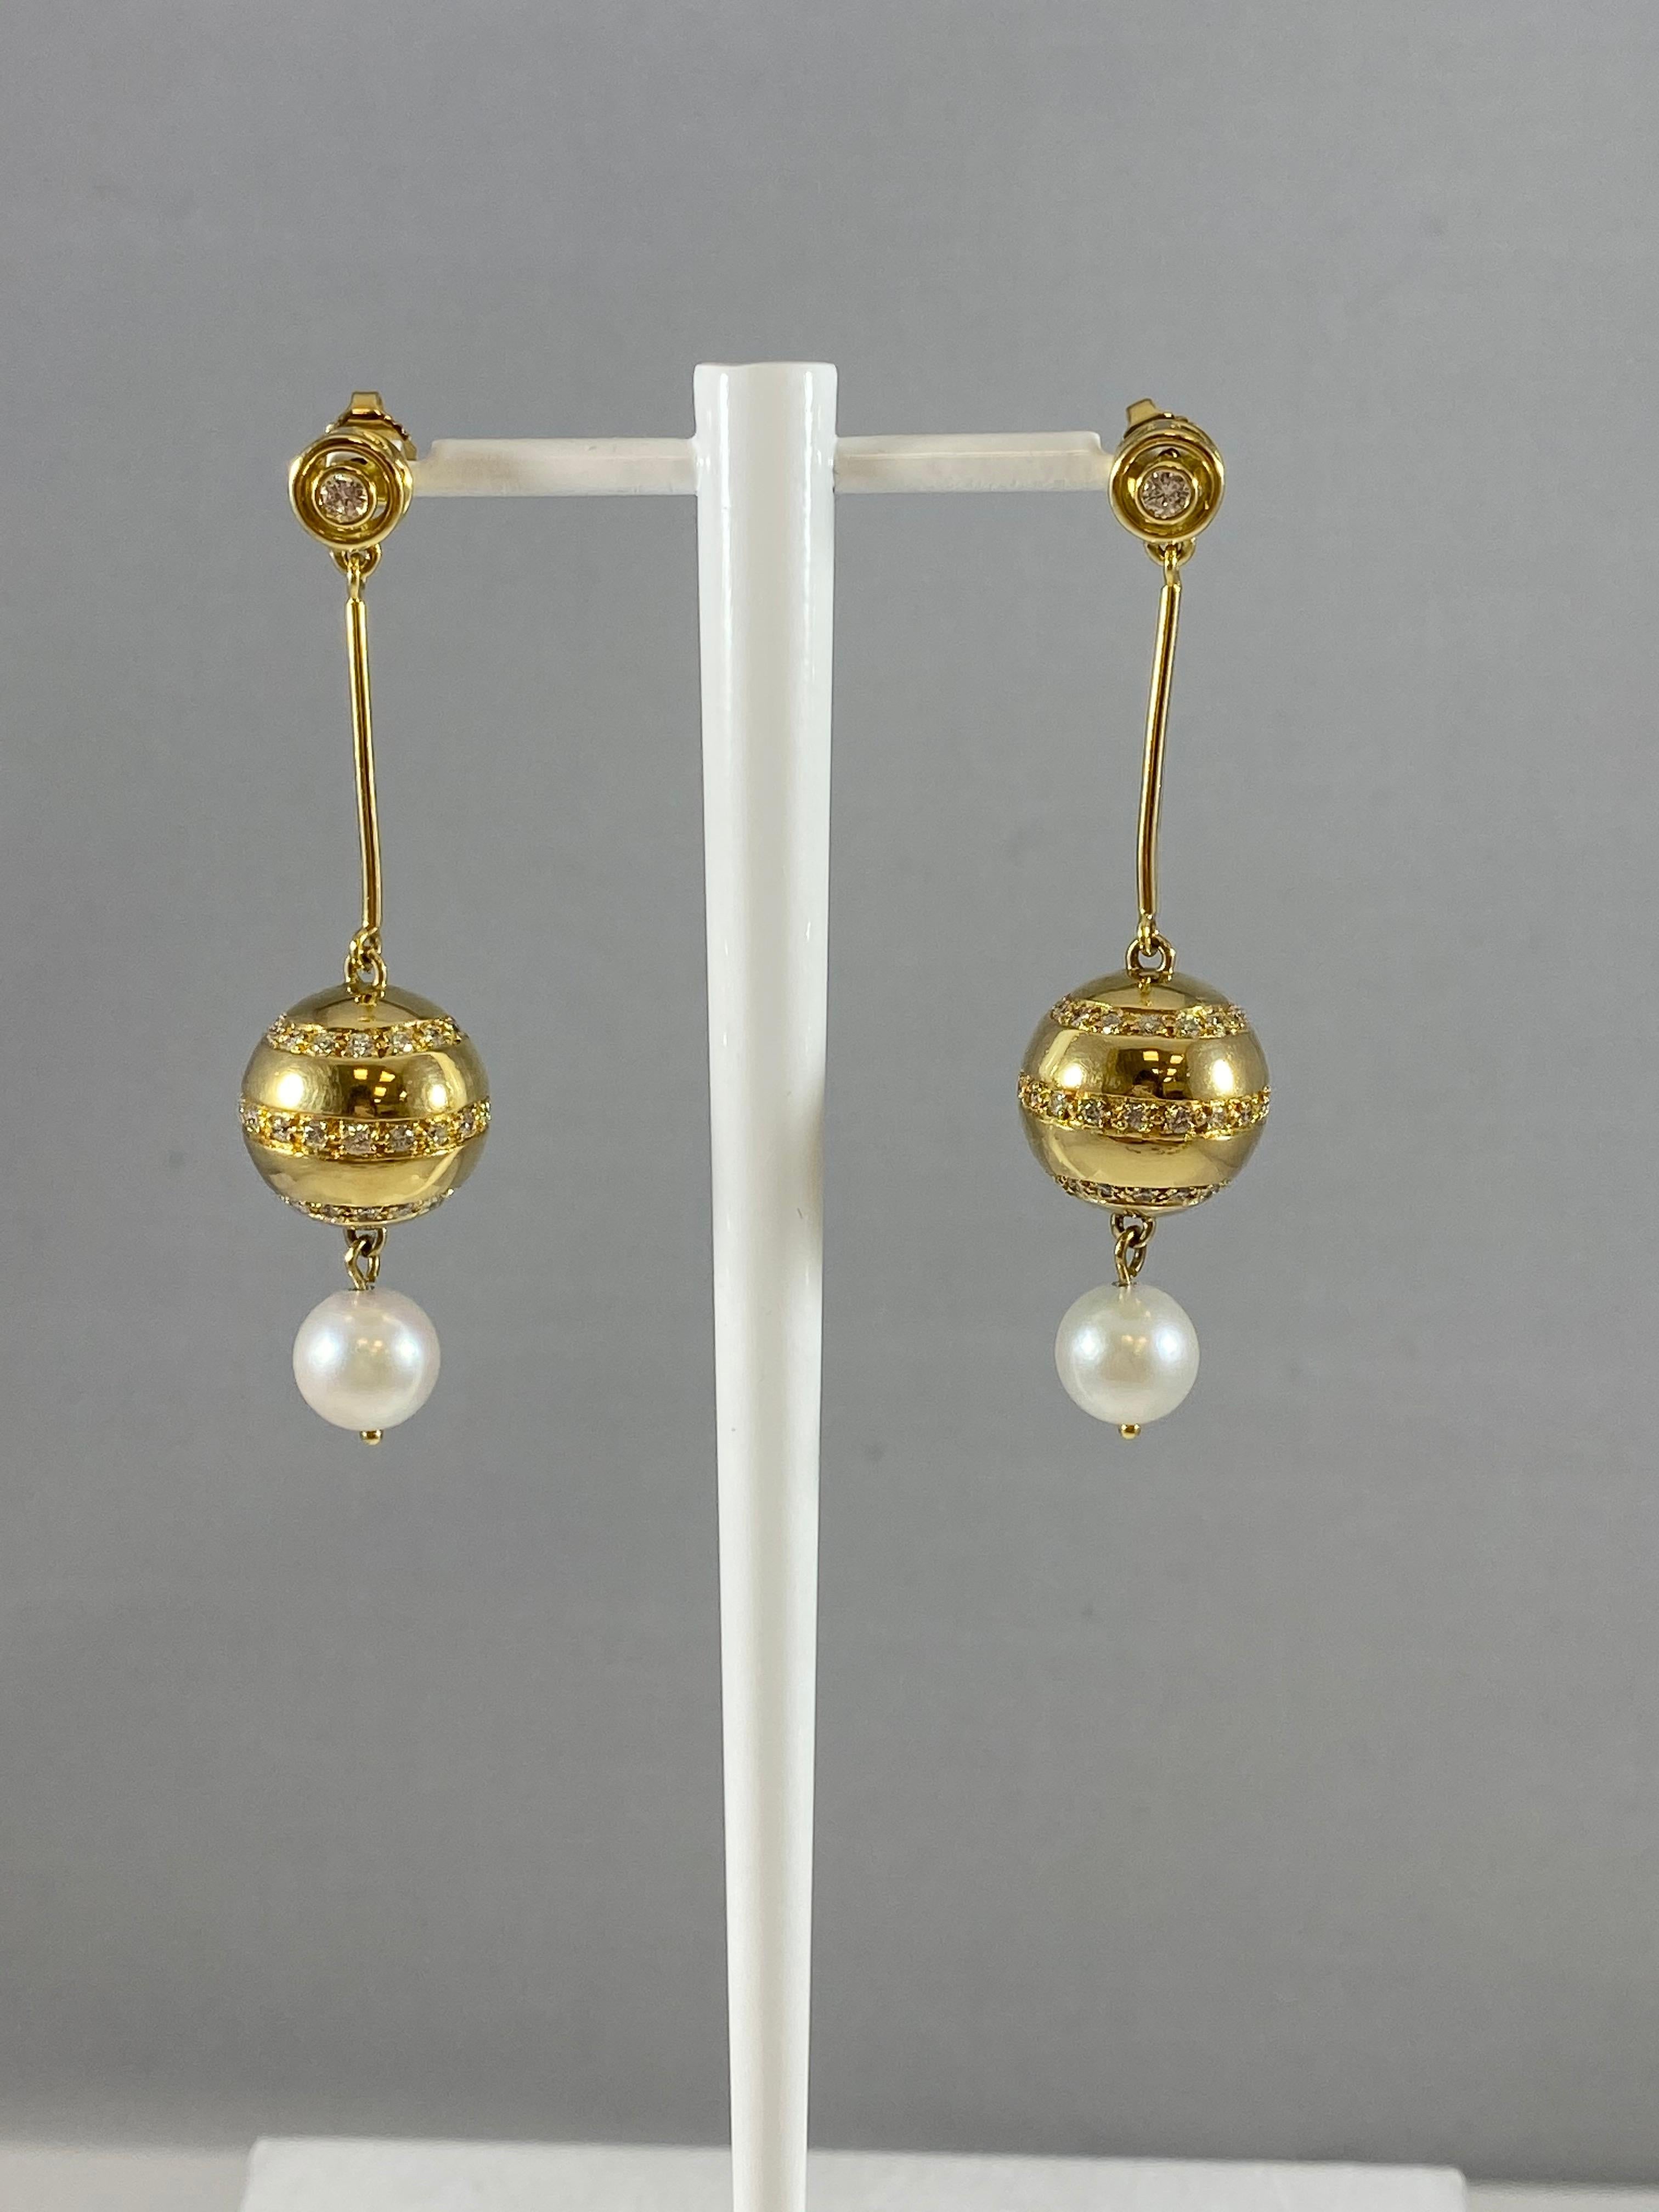 Brilliant Cut Hammerman Brothers Pearl and Diamond Drop Earrings For Sale